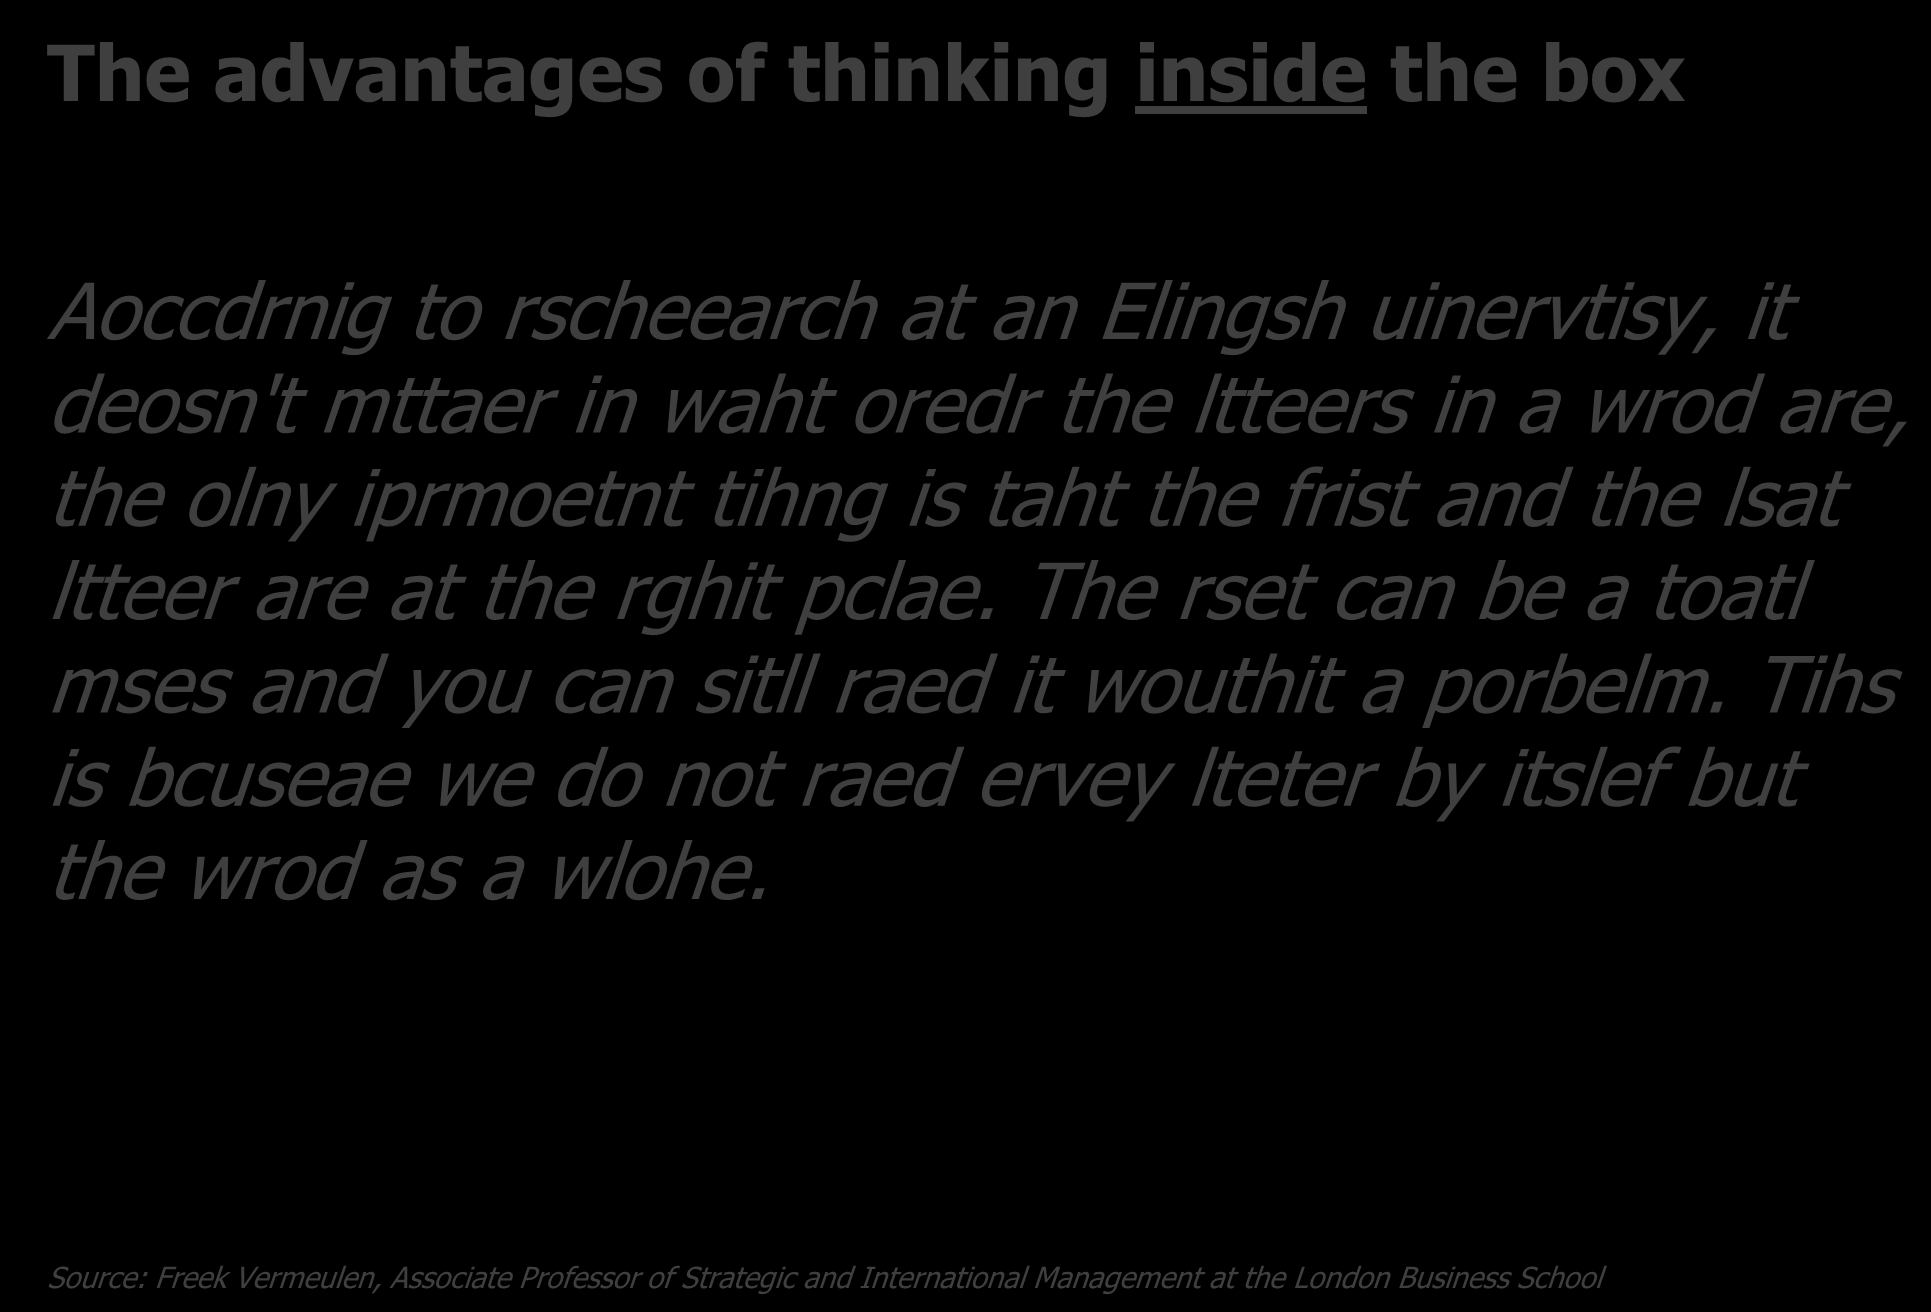 The advantages of thinking inside the box Aoccdrnig to rscheearch at an Elingsh uinervtisy, it deosn't mttaer in waht oredr the ltteers in a wrod are, the olny iprmoetnt tihng is taht the frist and